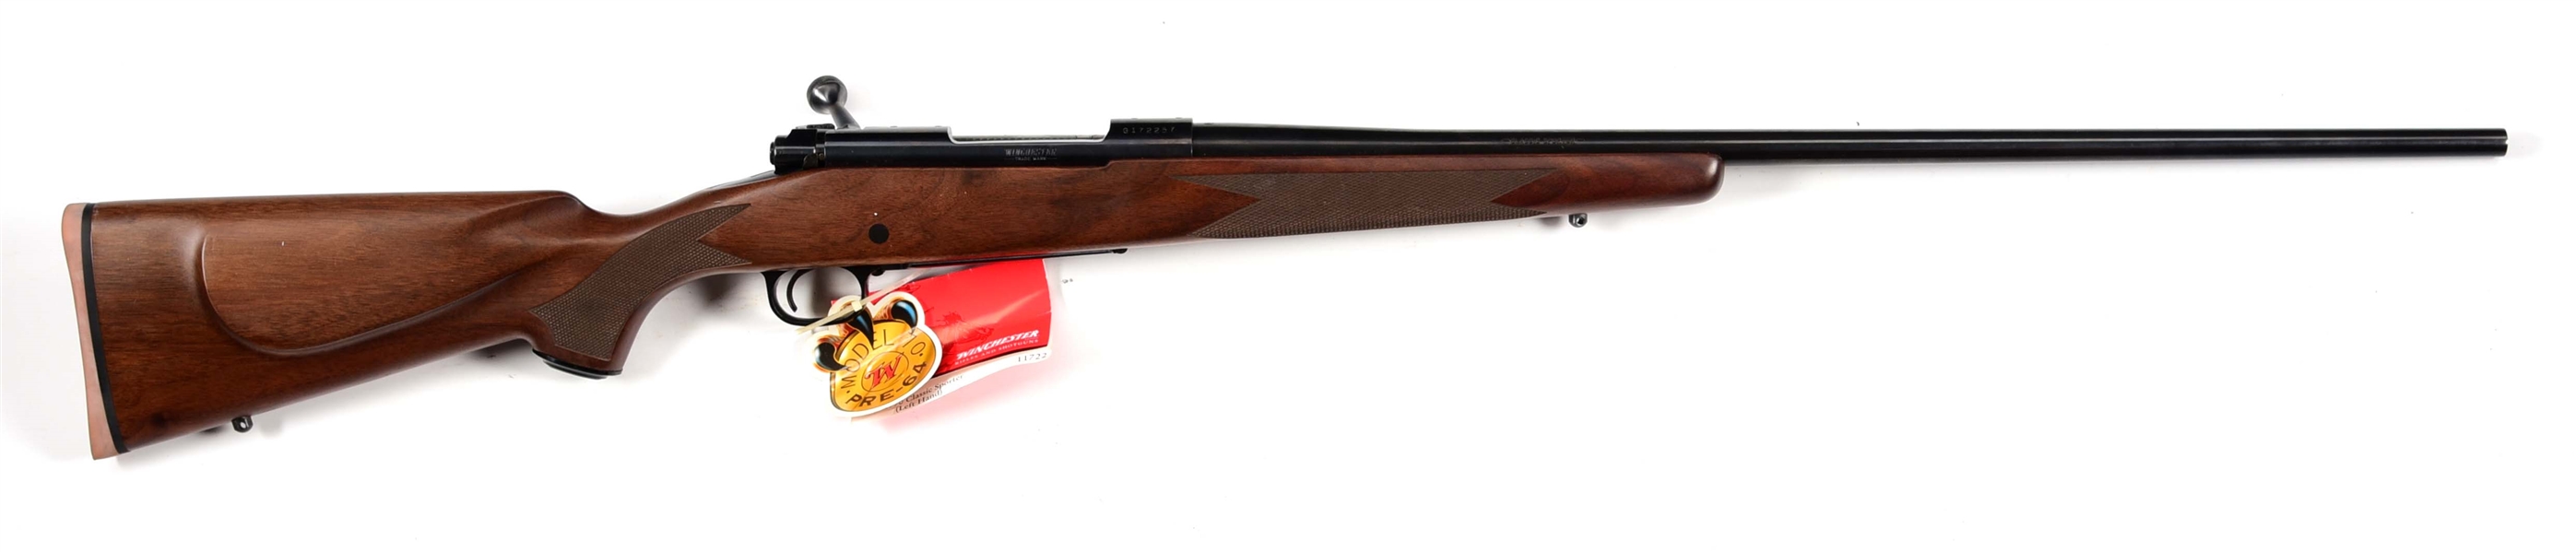 (M) WINCHESTER MODEL 70 LEFT HAND BOLT ACTION RIFLE IN 7MM REMINGTON MAGNUM.